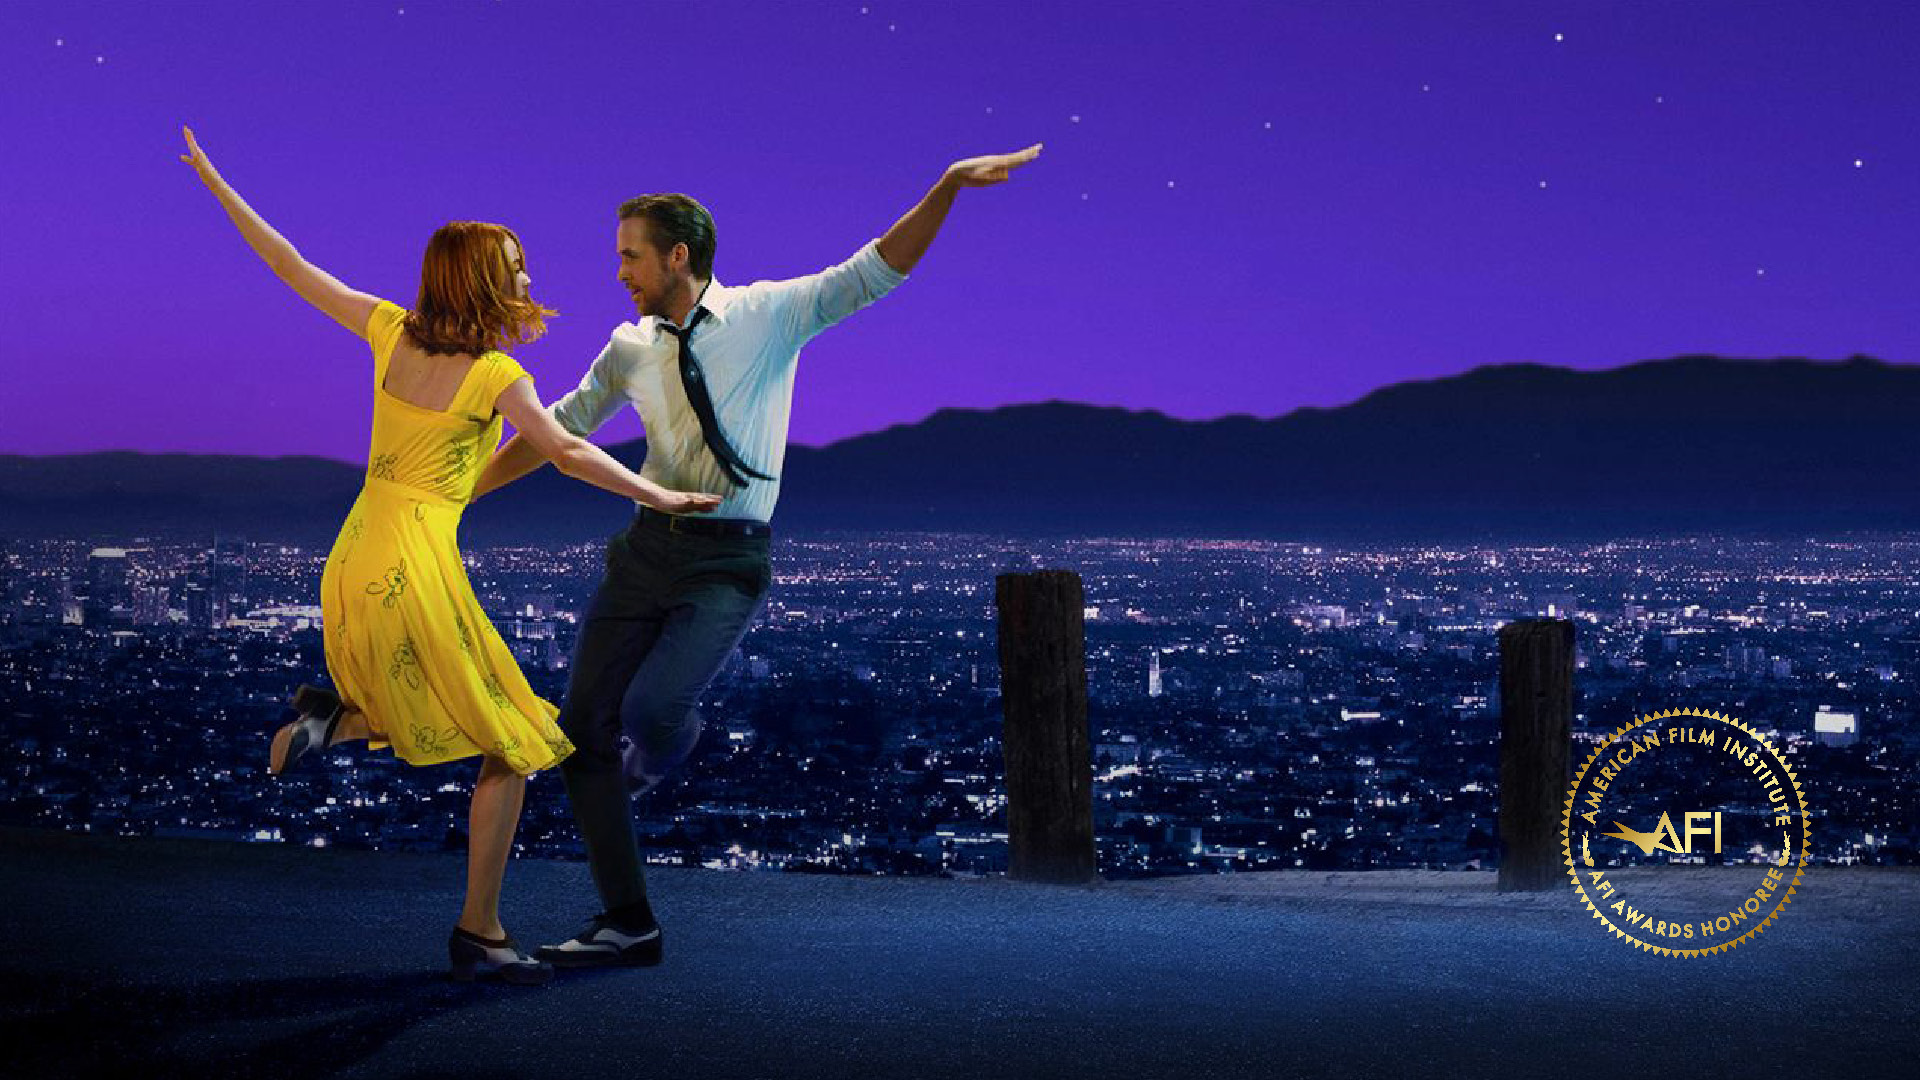 In the corner is the AFI AWARDS logo. The film still is from LA LA LAND and shows Mia and Sebastian (played by Emma Stone and Ryan Gosling) dancing with a purple sky and the lights of Los Angeles in the background.